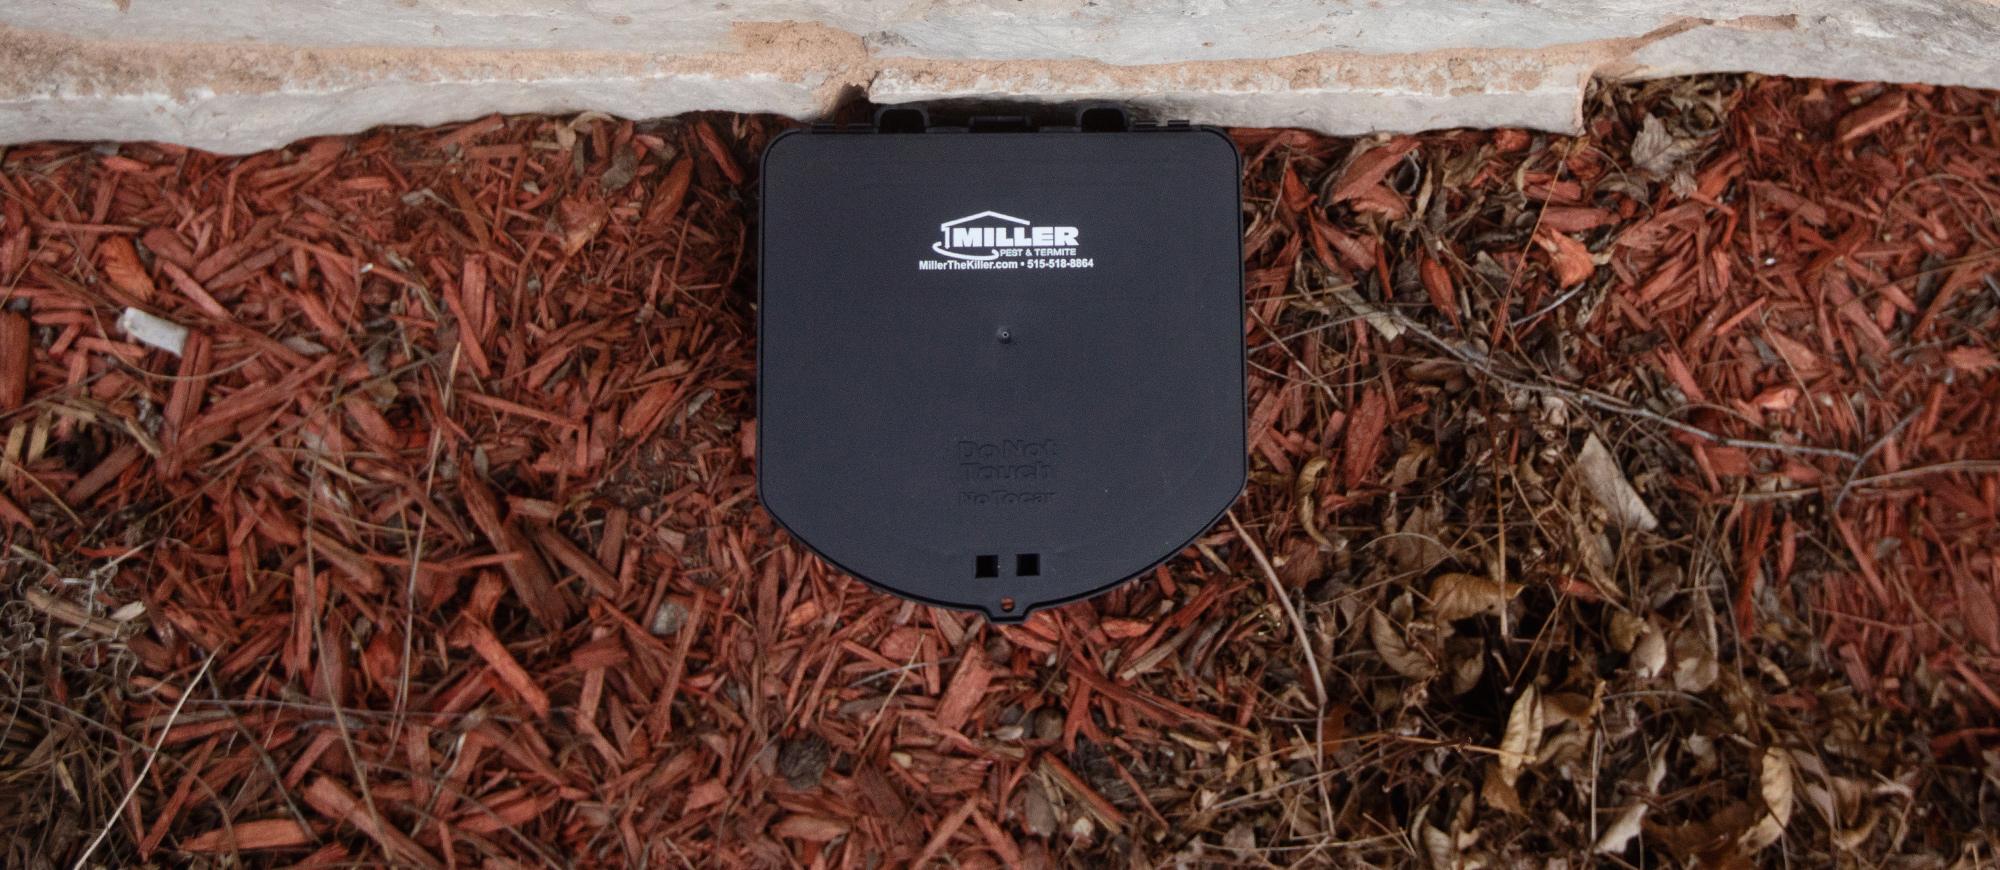 exterior rodent station for midwest homes